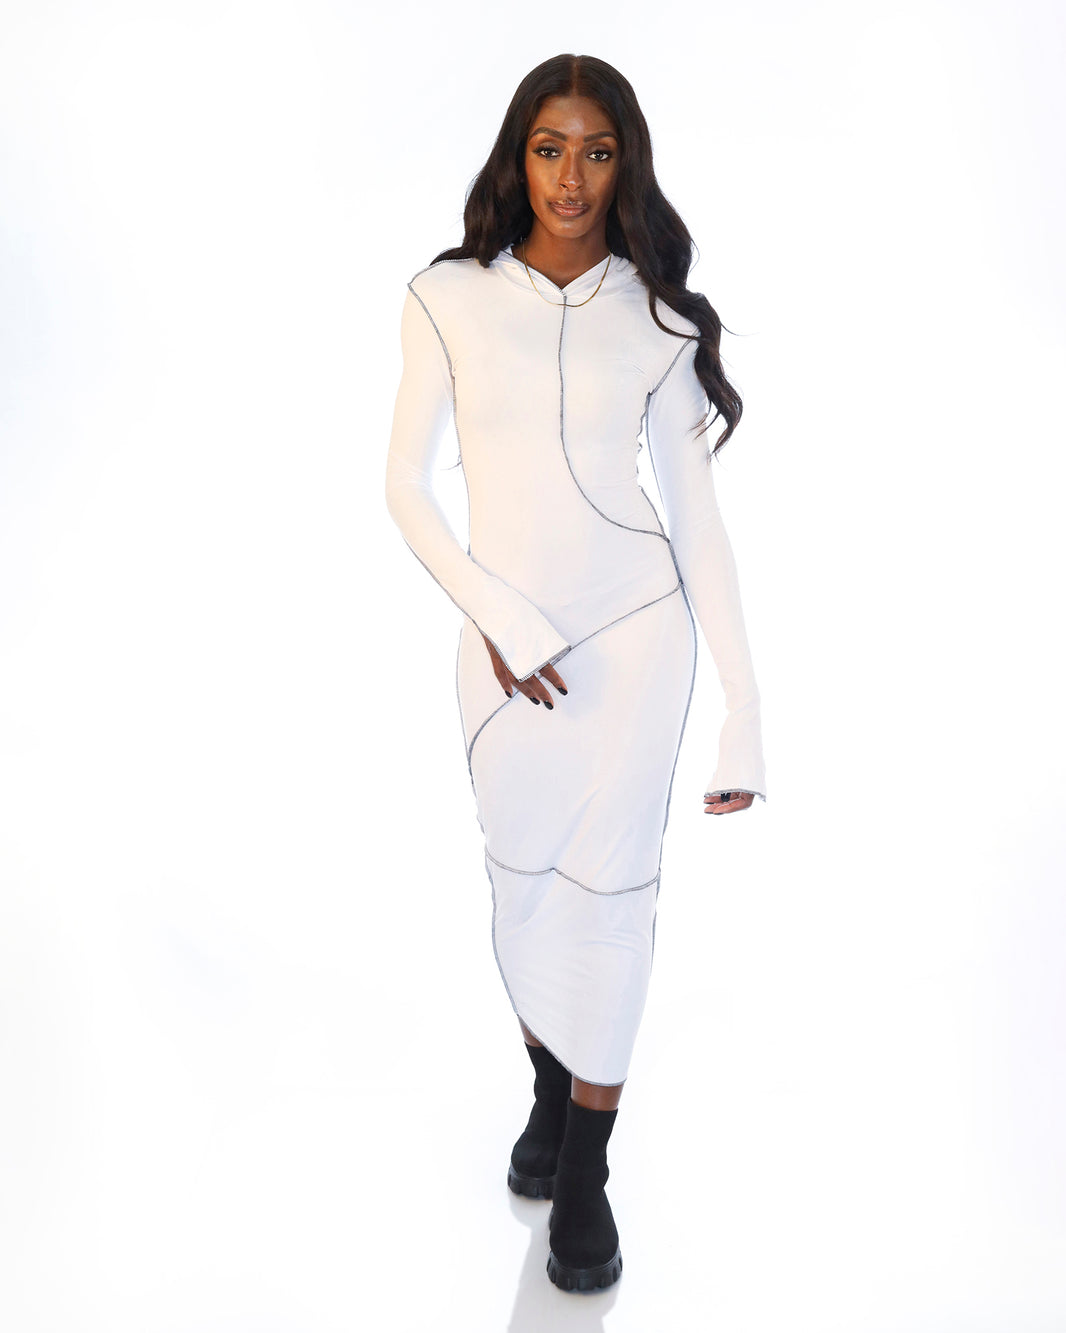 Best-selling matching sets, jumpsuits and footwear from Hendrick Brun